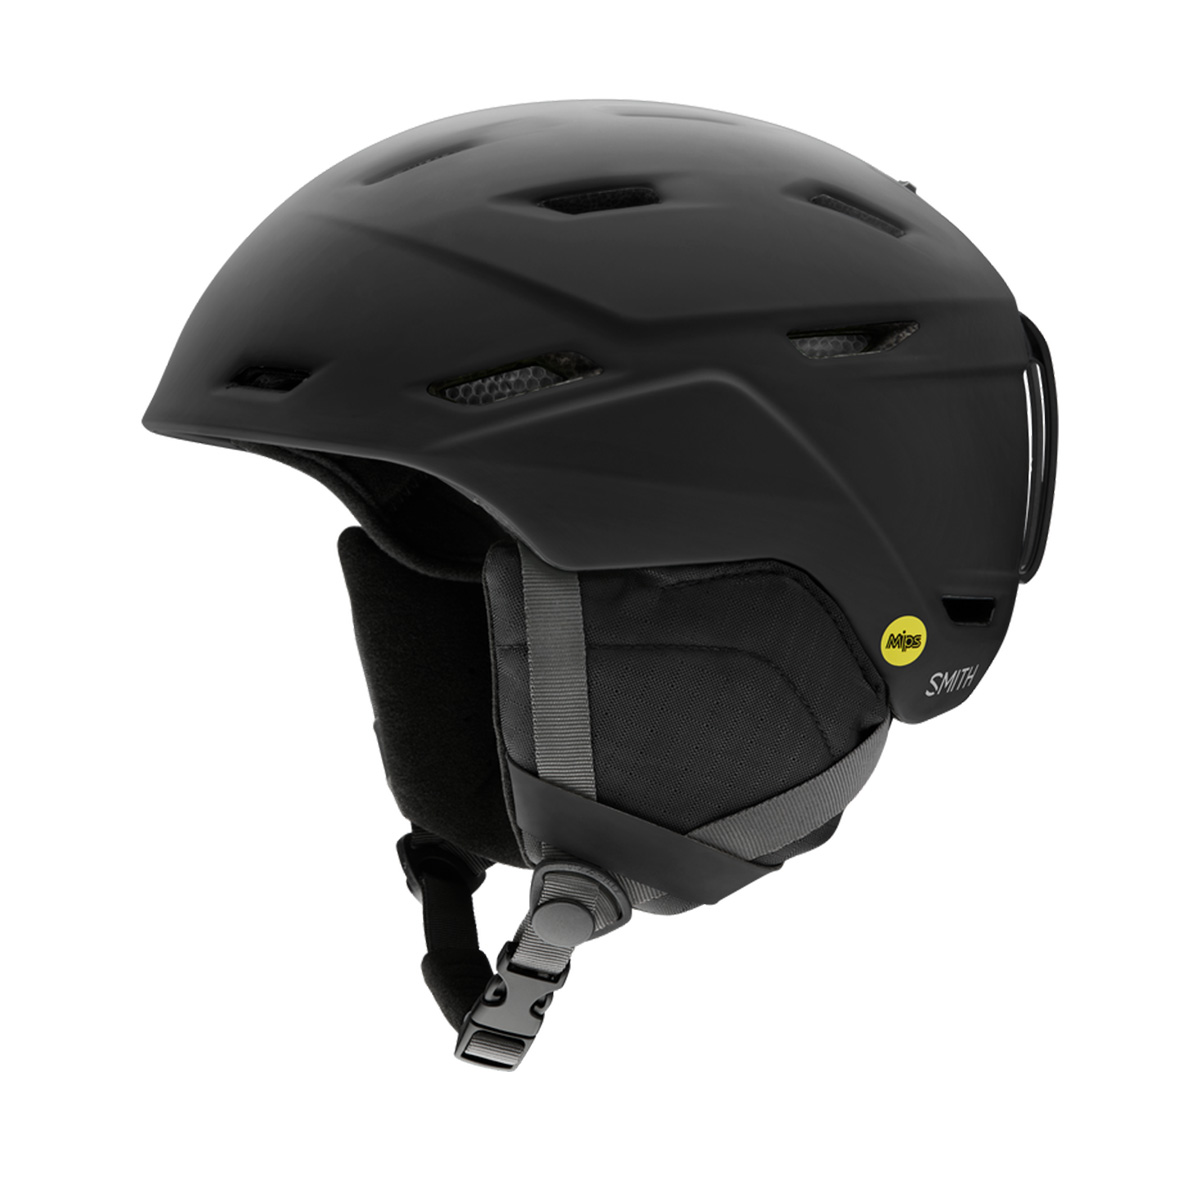 CASQUE SMITH MISSION MIPS NOIR MAT SMALL